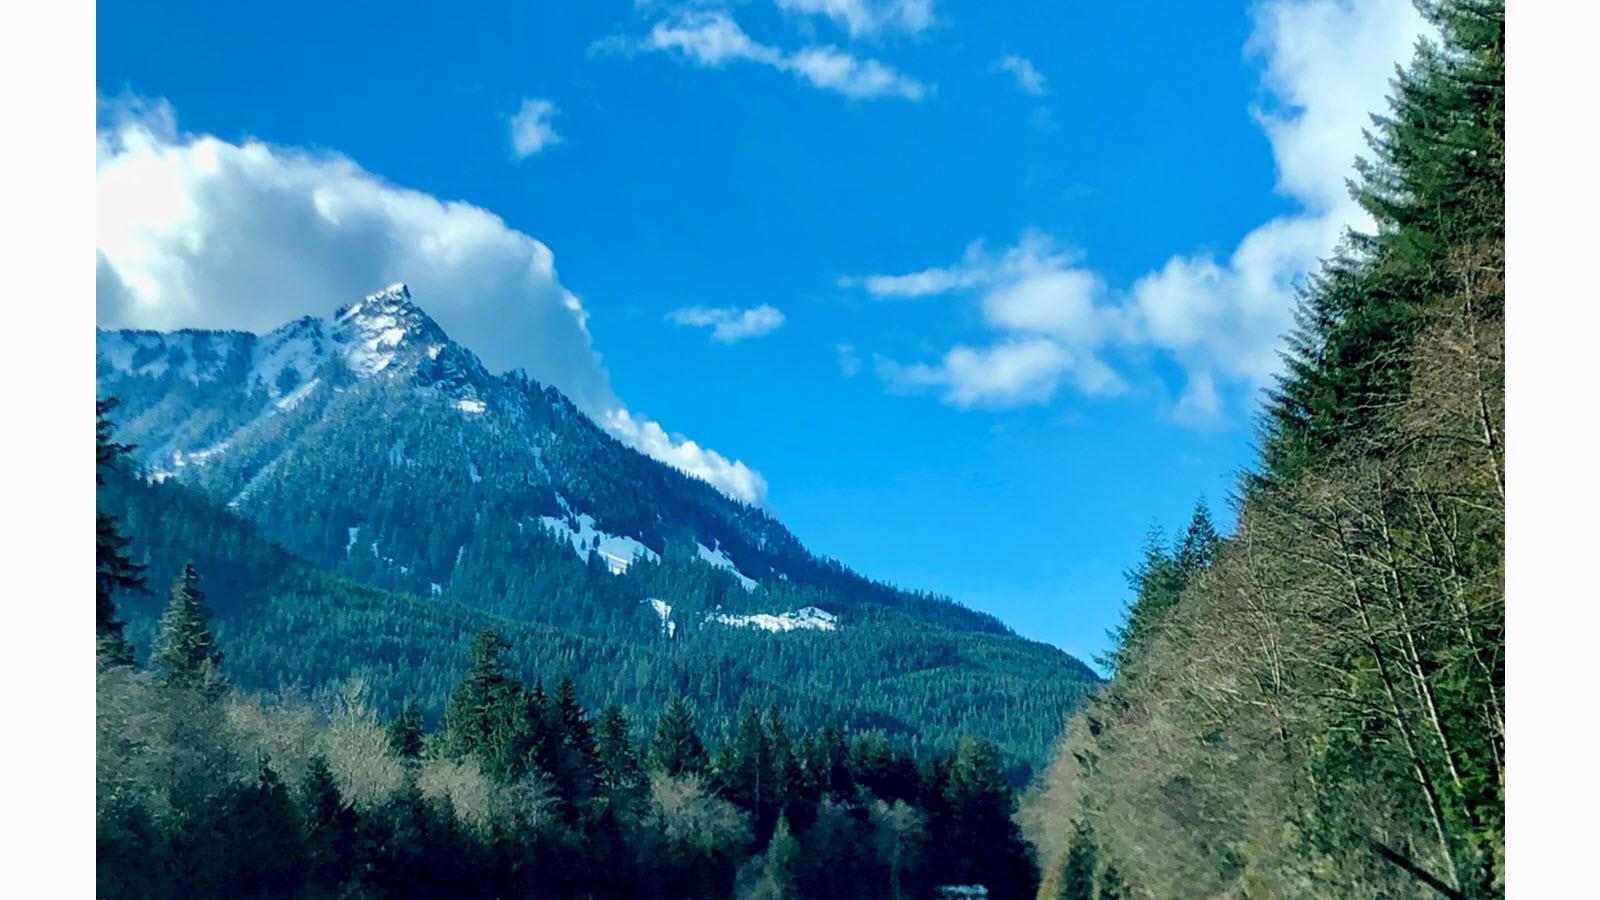 Snoqualmie Pass in Washington state, USA - snow-capped mountain range against a blue sky with puffy white clouds